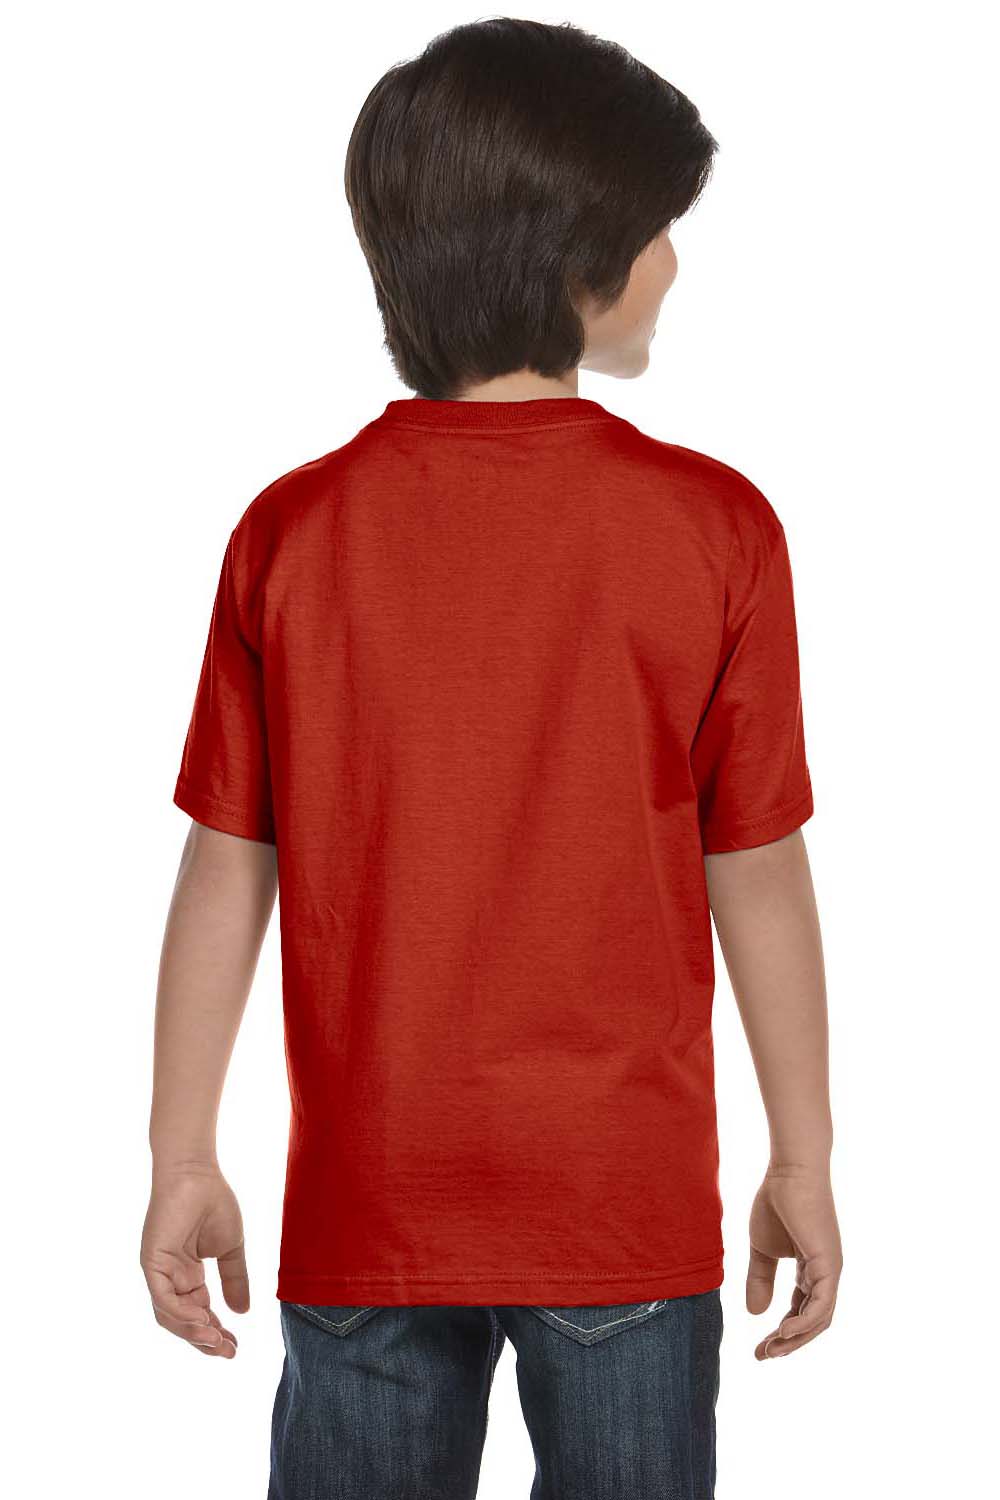 Hanes 5380 Youth Beefy-T Short Sleeve Crewneck T-Shirt Red Back